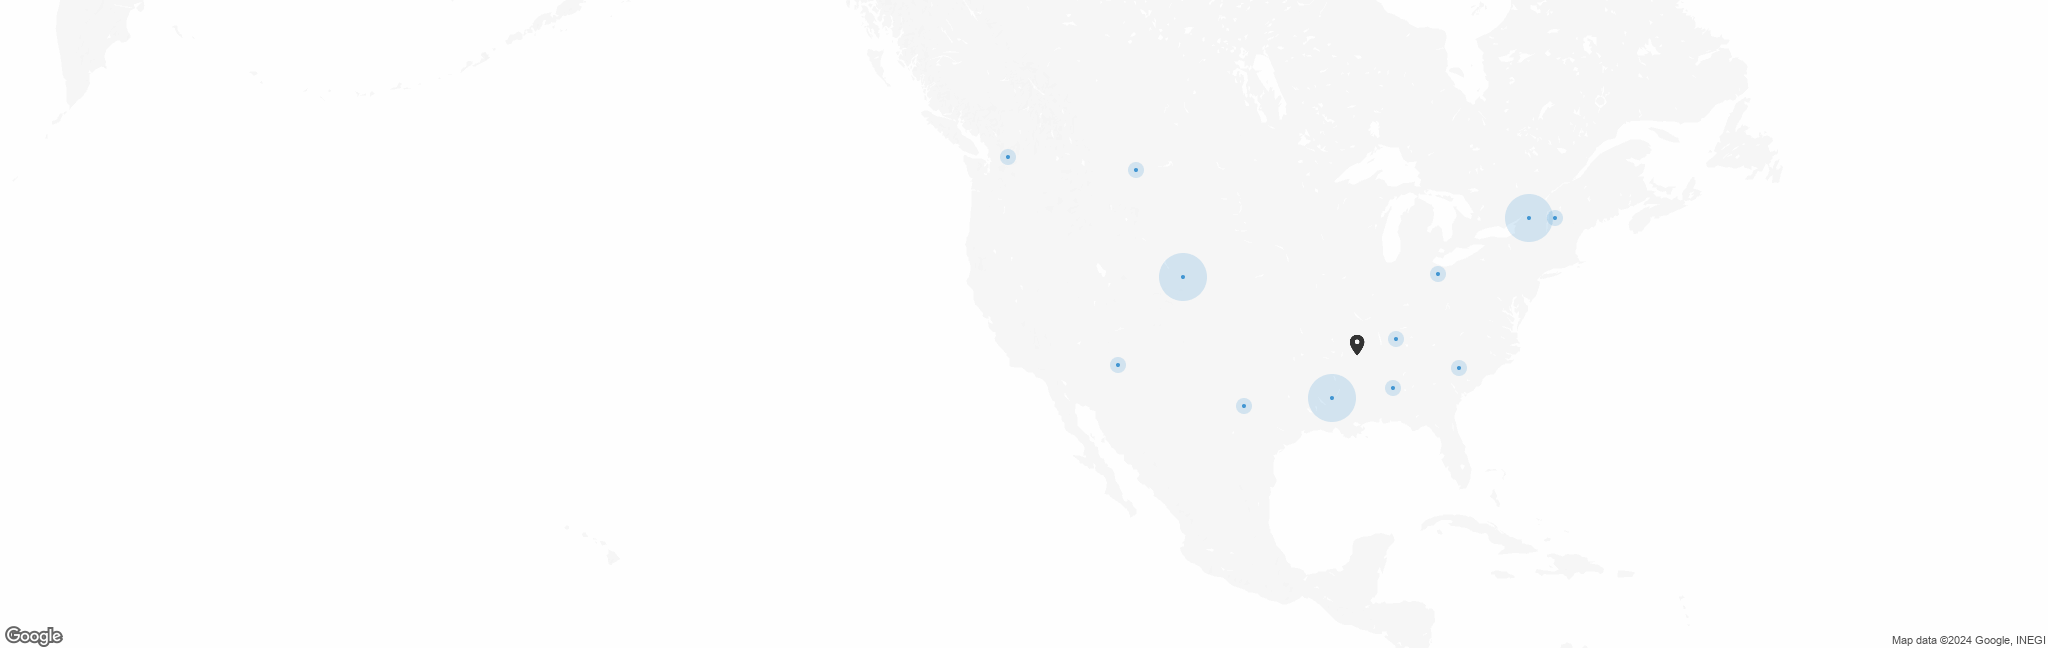 Map of US with pin of National Foundation for Transplants, Inc. location